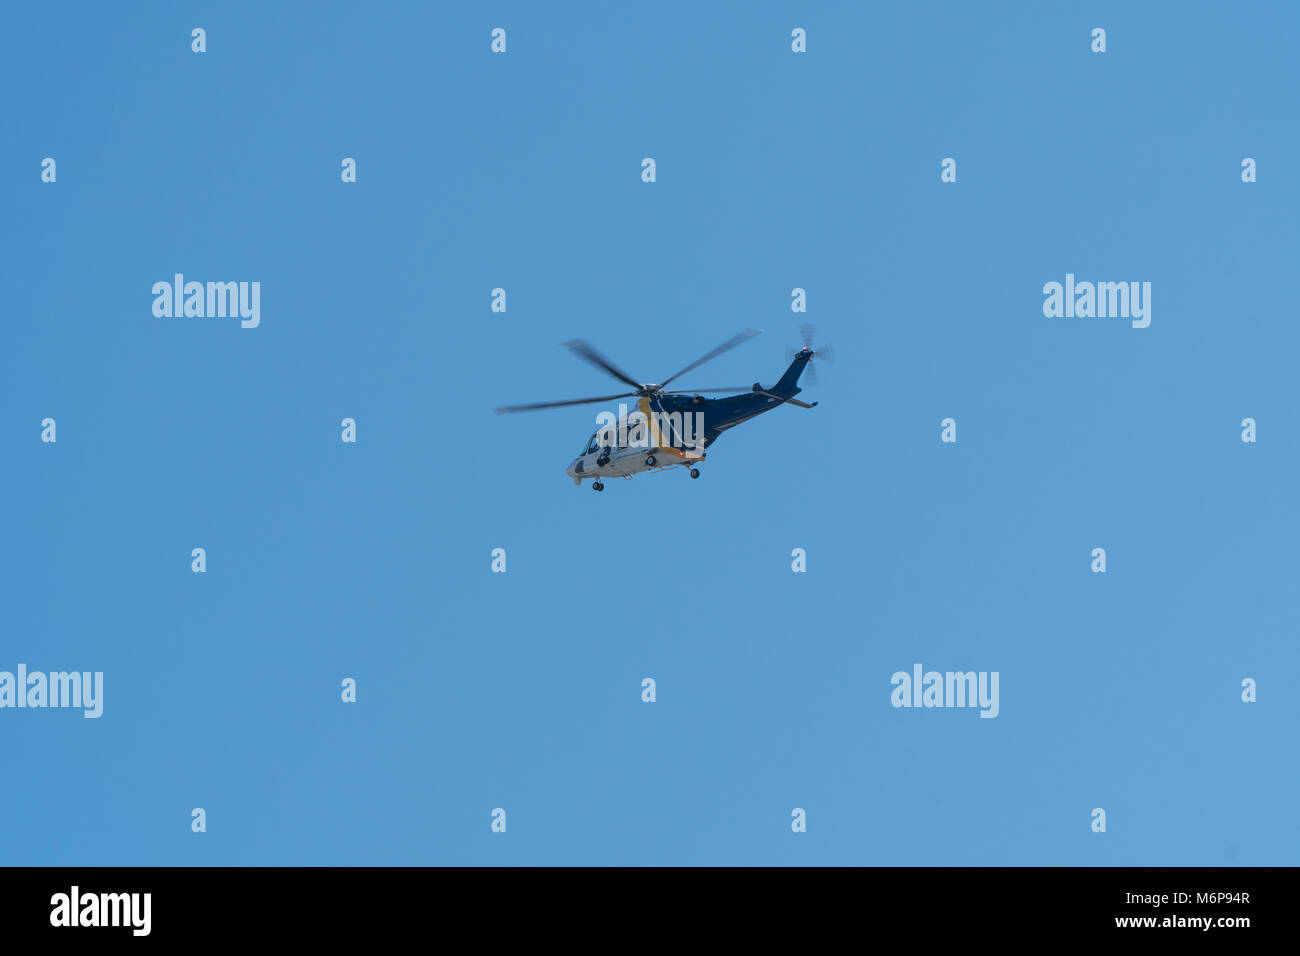 Generic blue and white police helicopter with visual camera surveillance equipment fly in sky high above city aerial patrol Stock Photo